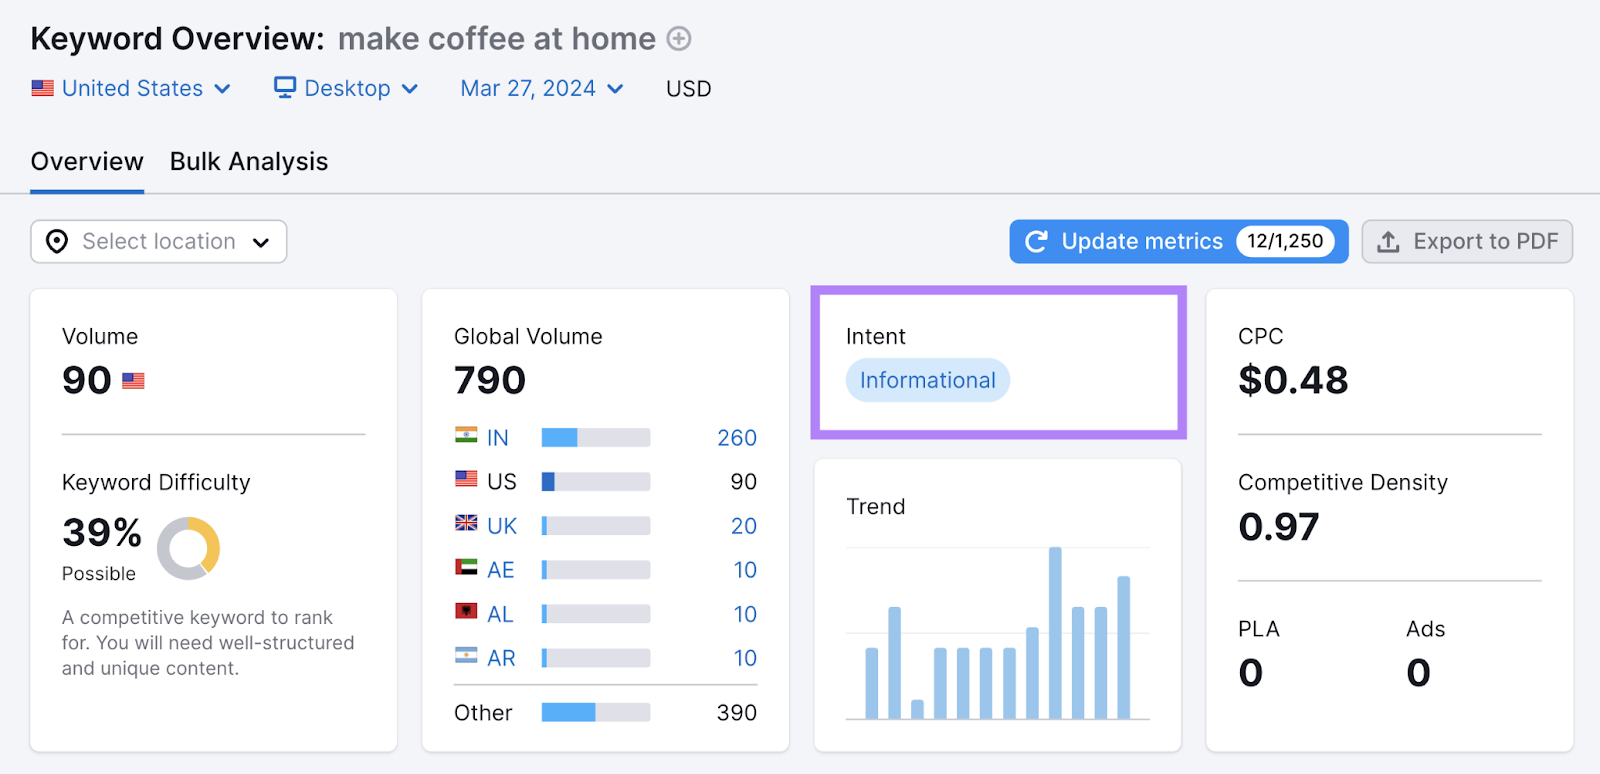 Keyword Overview dashboard with metrics shown for "make coffee at home" keyword